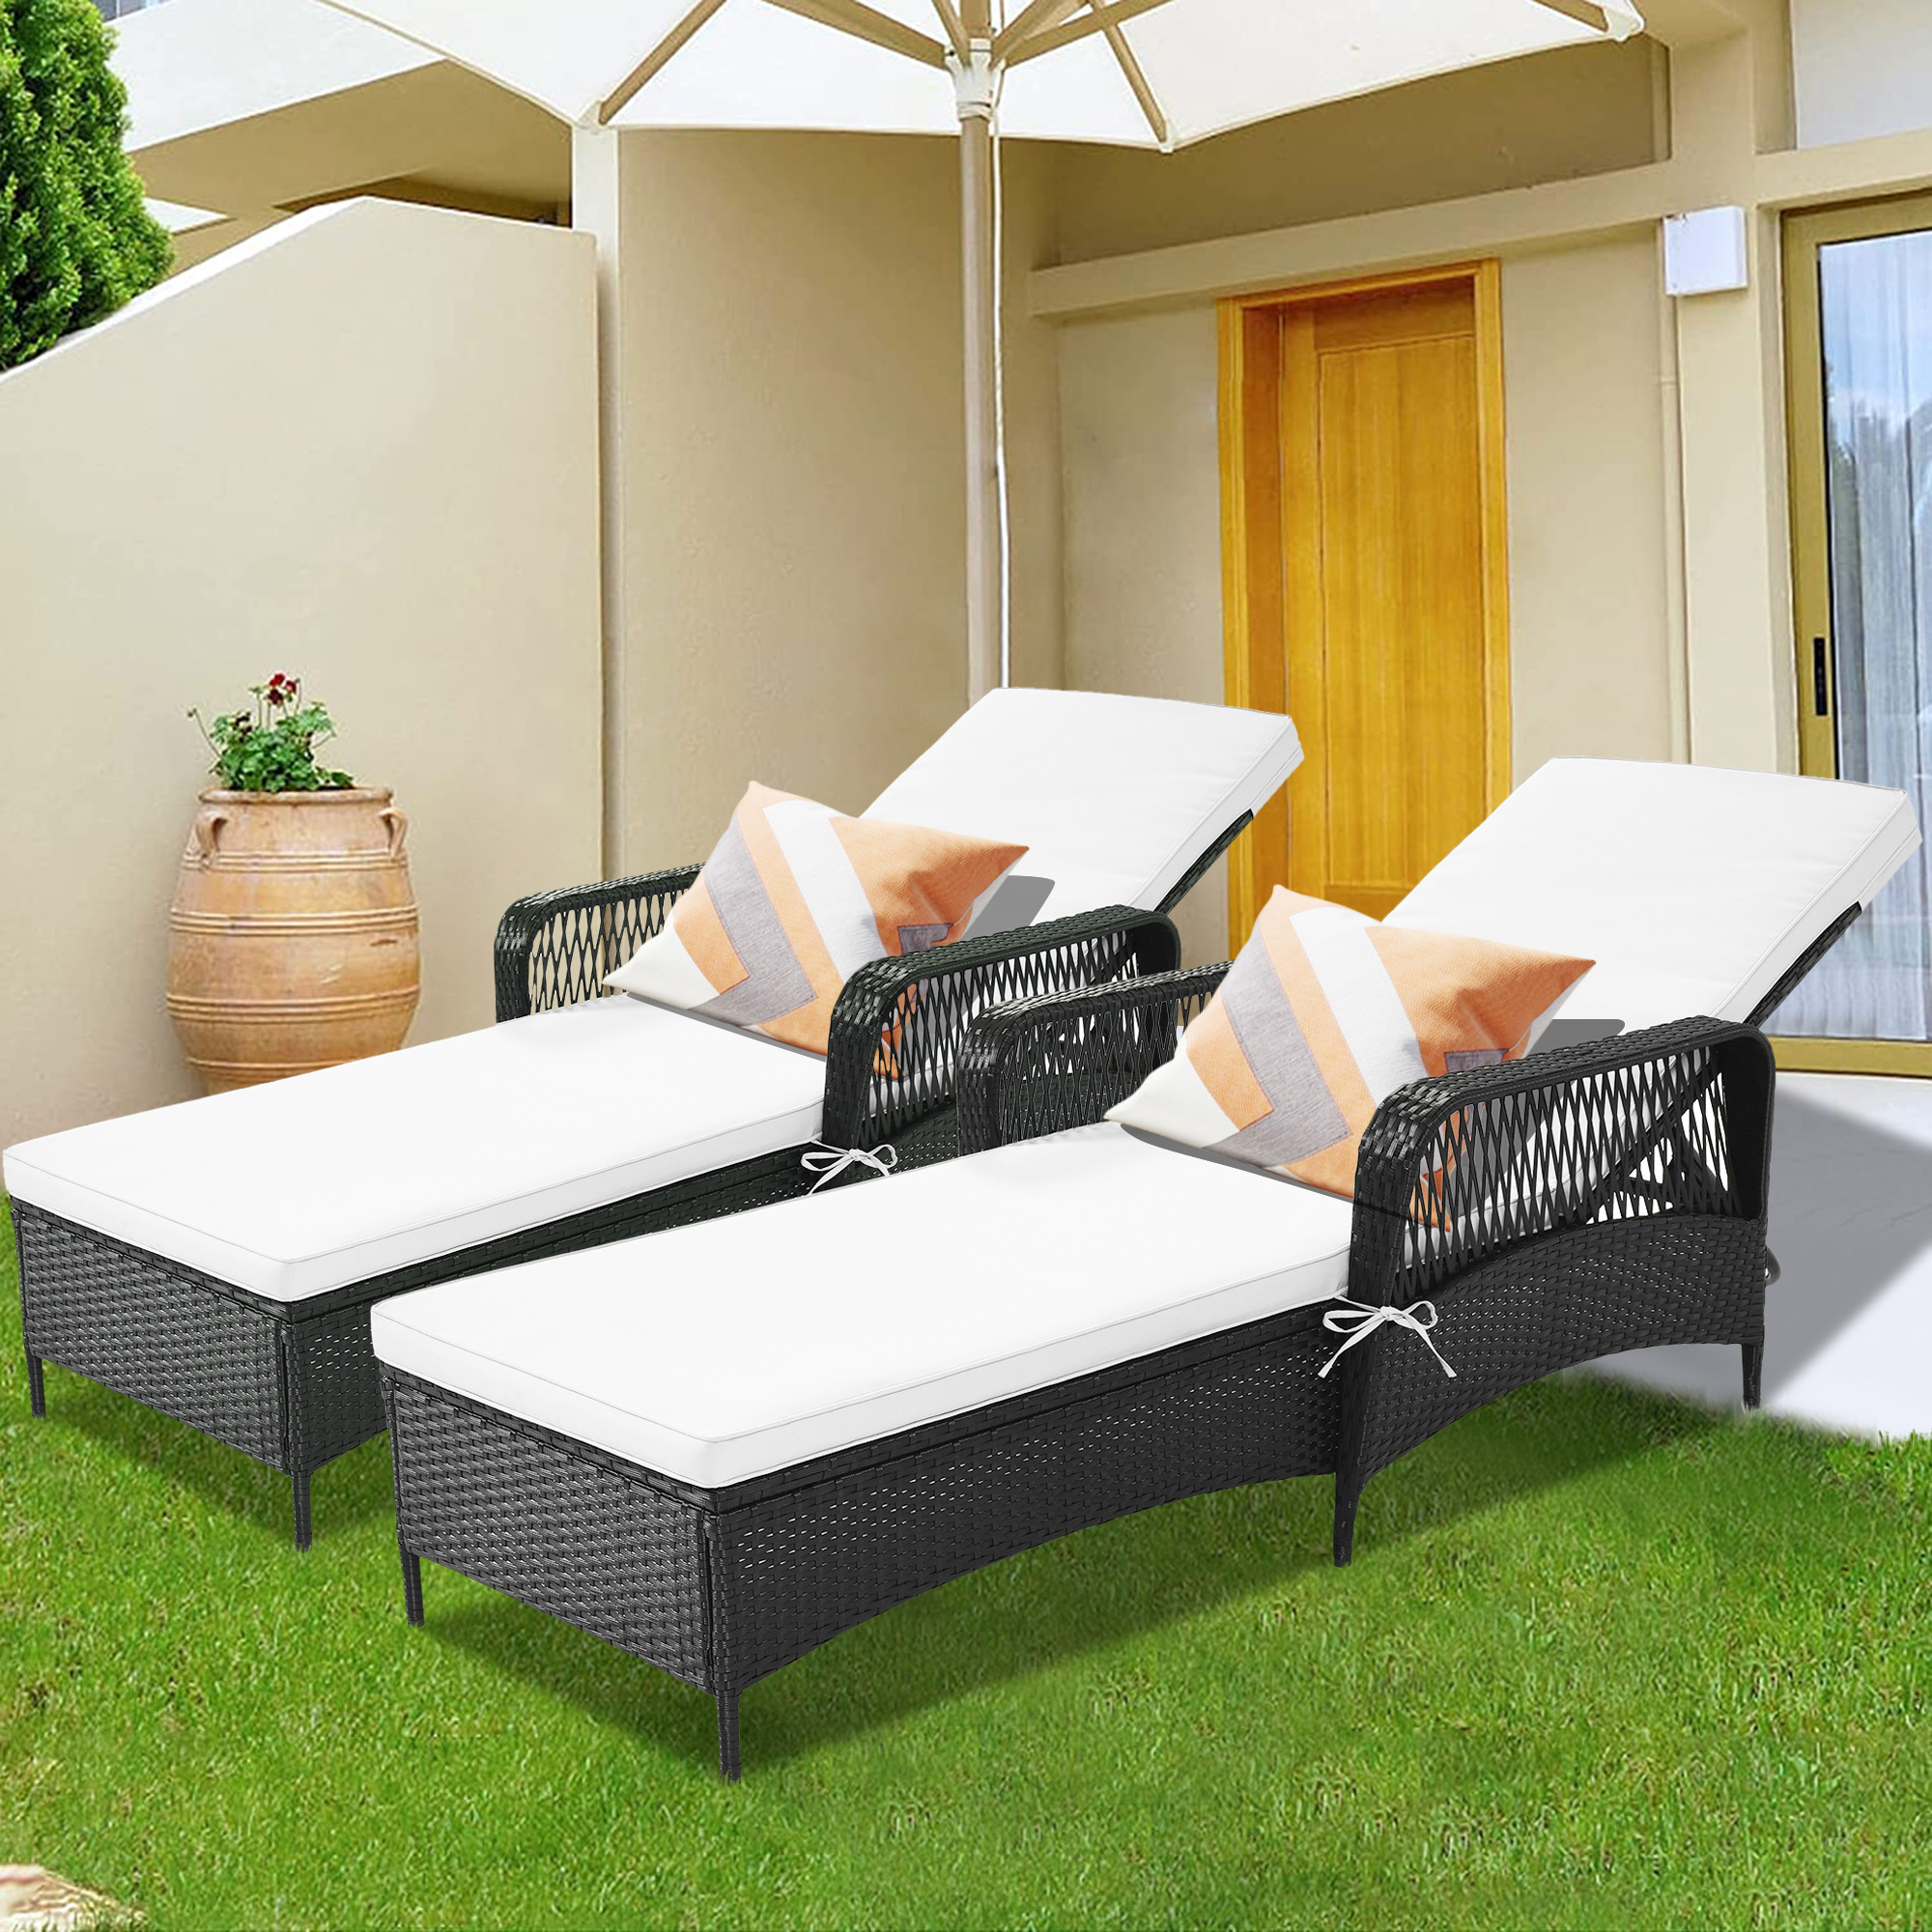 Chaise Lounge Chairs for Outside 2 Pieces, Patio Adjustable Lounge Chairs Set of 2, Outdoor Rattan Wicker Pool Chaise Lounge Chairs Cushioned Poolside Chaise Lounge Set, Beige - image 1 of 11